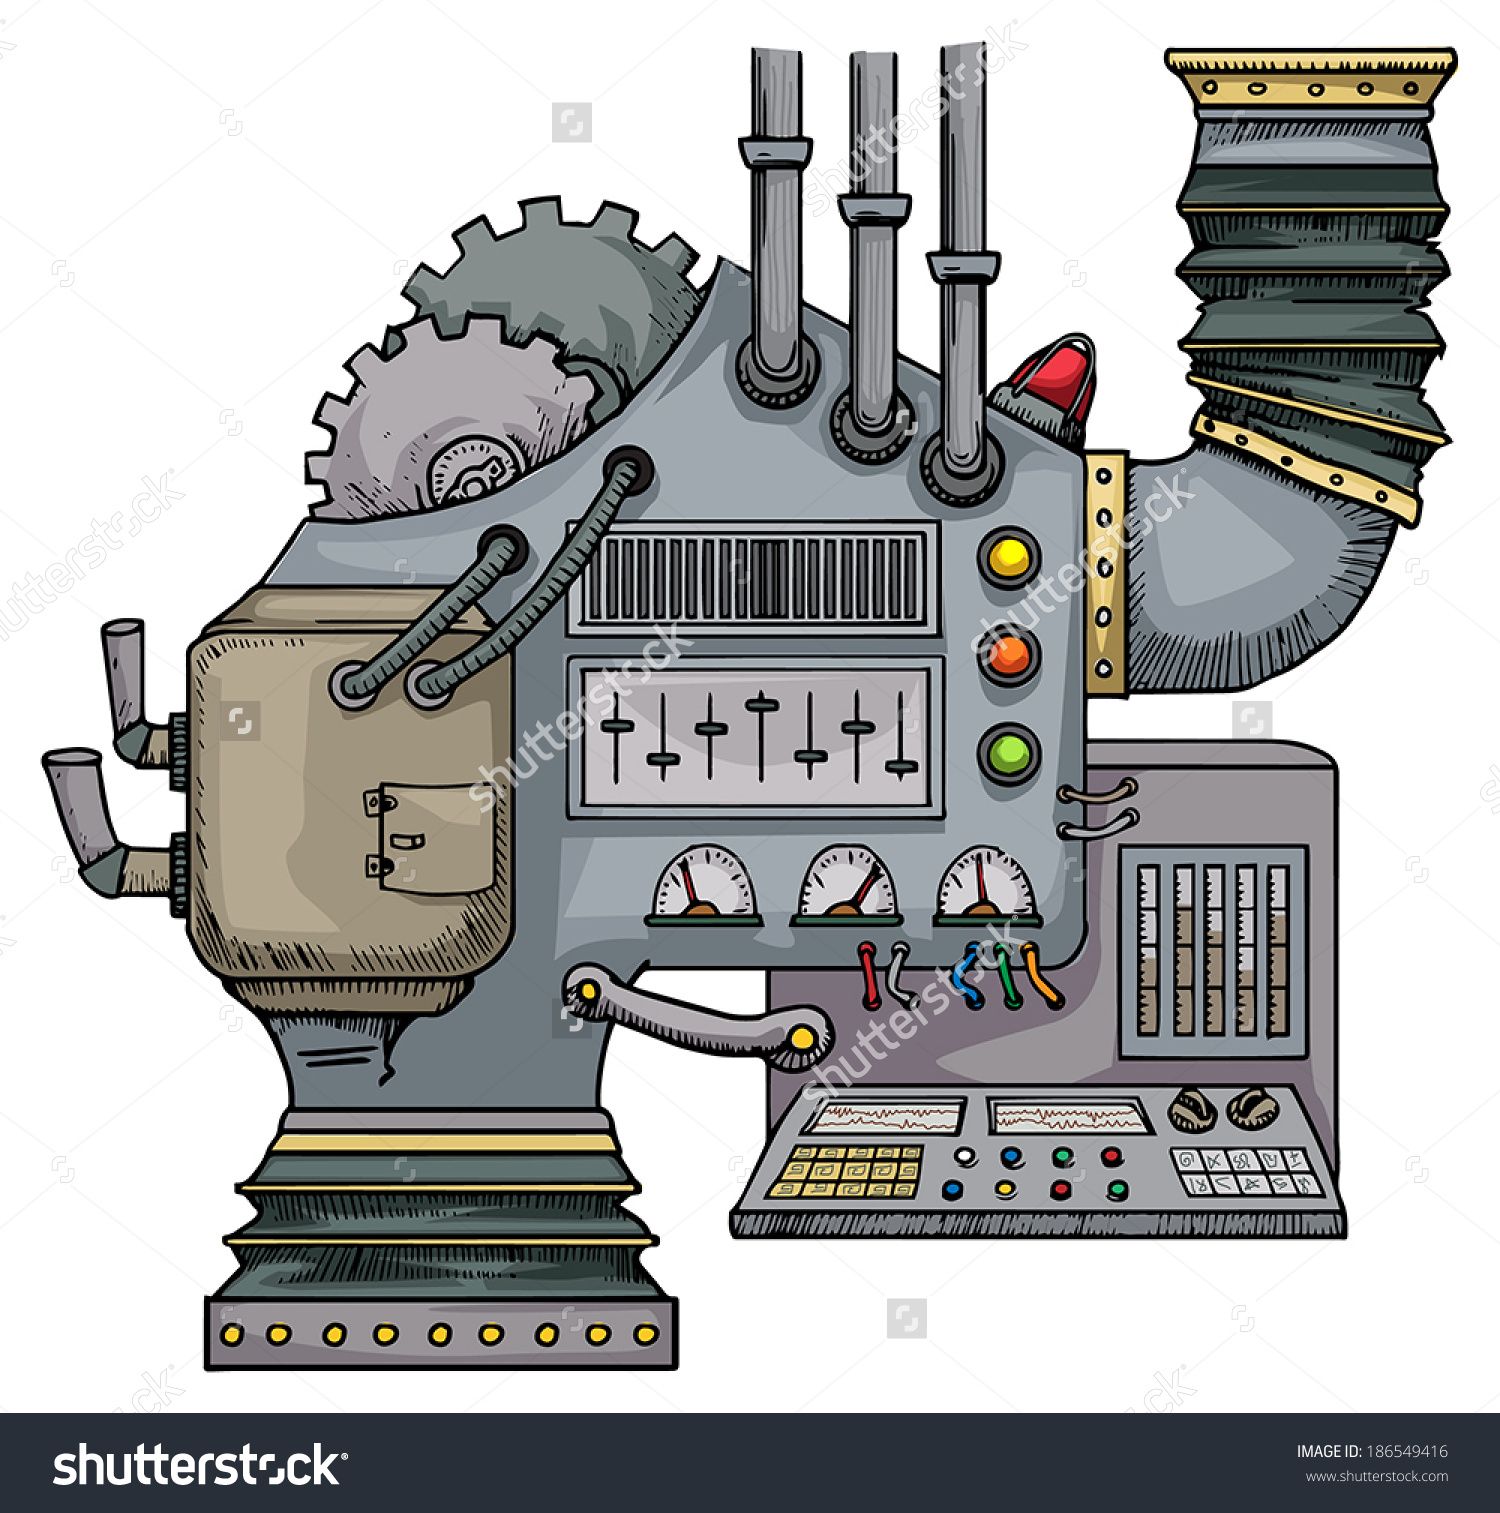 Factories clipart factory machine. Pin by pam pilger